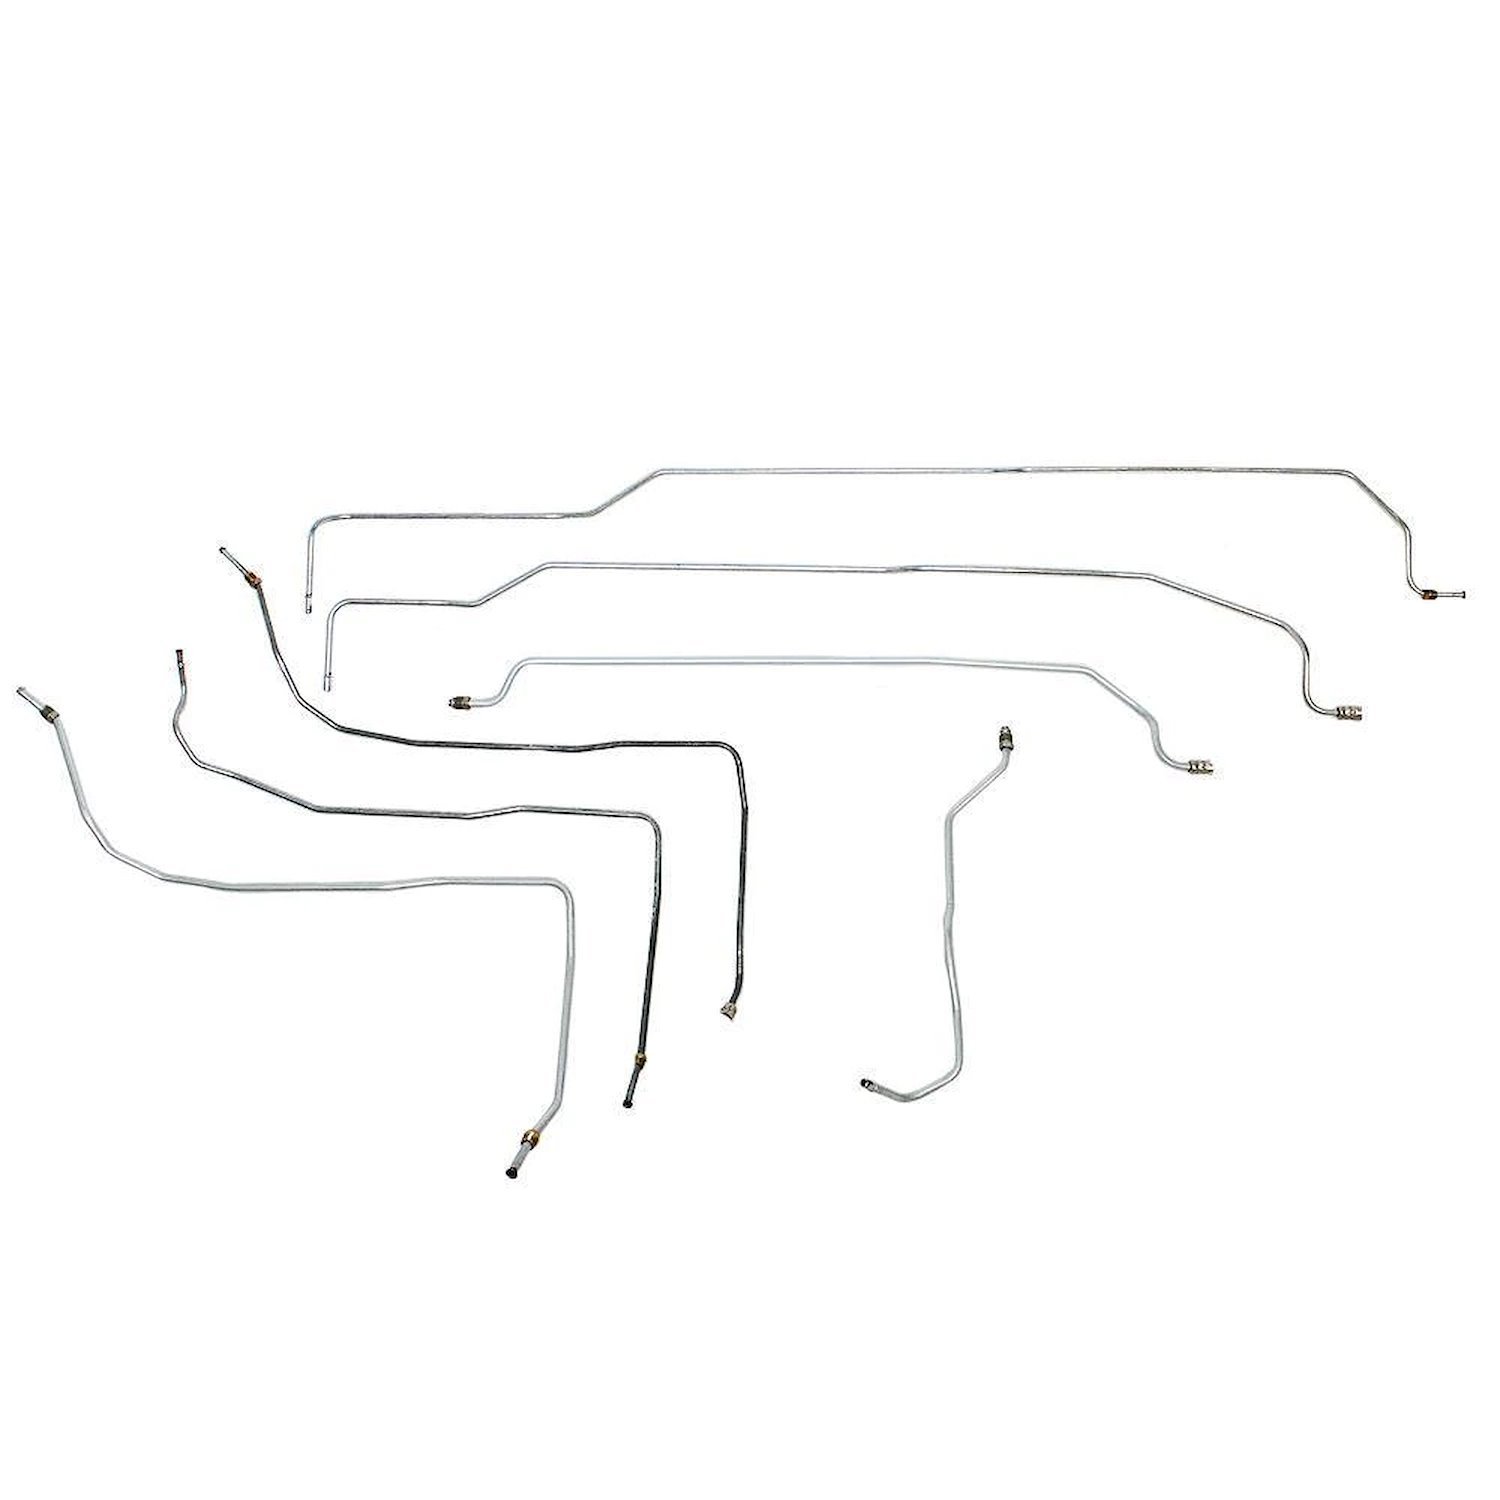 Complete Fuel Line Kit for 2001-2005 Chevy S-10 Extended Cab Truck with Short Bed [Stainless Steel]